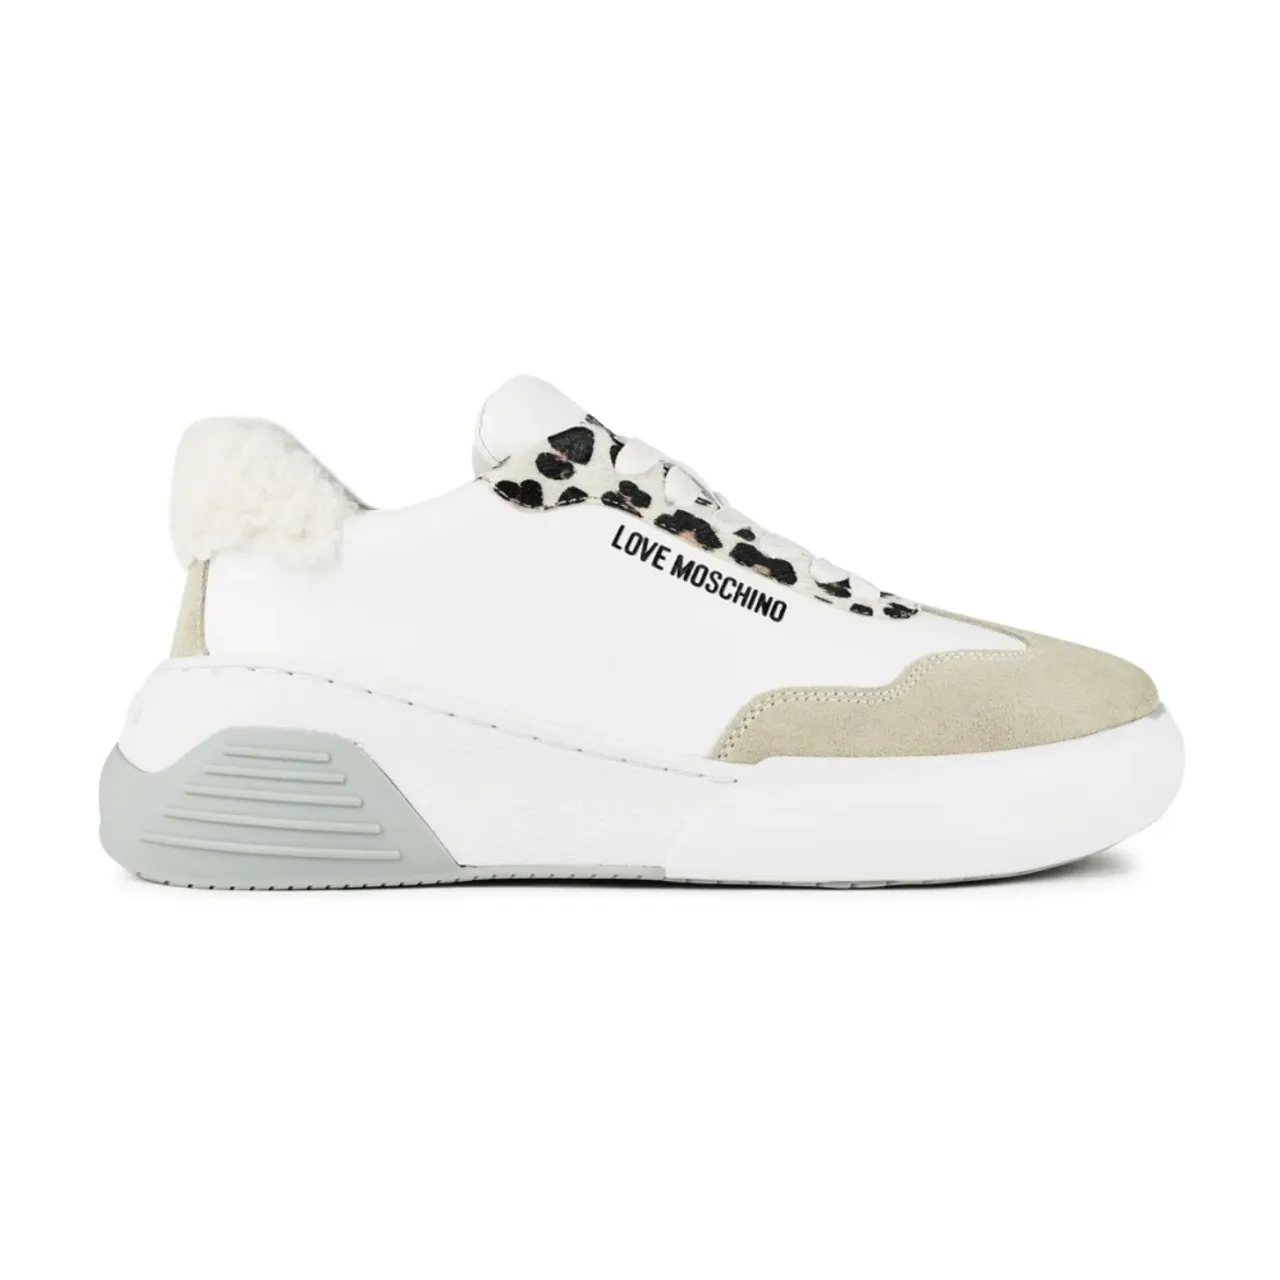 Moschino , Leopard Chunky Sneakers ,White female, Sizes: